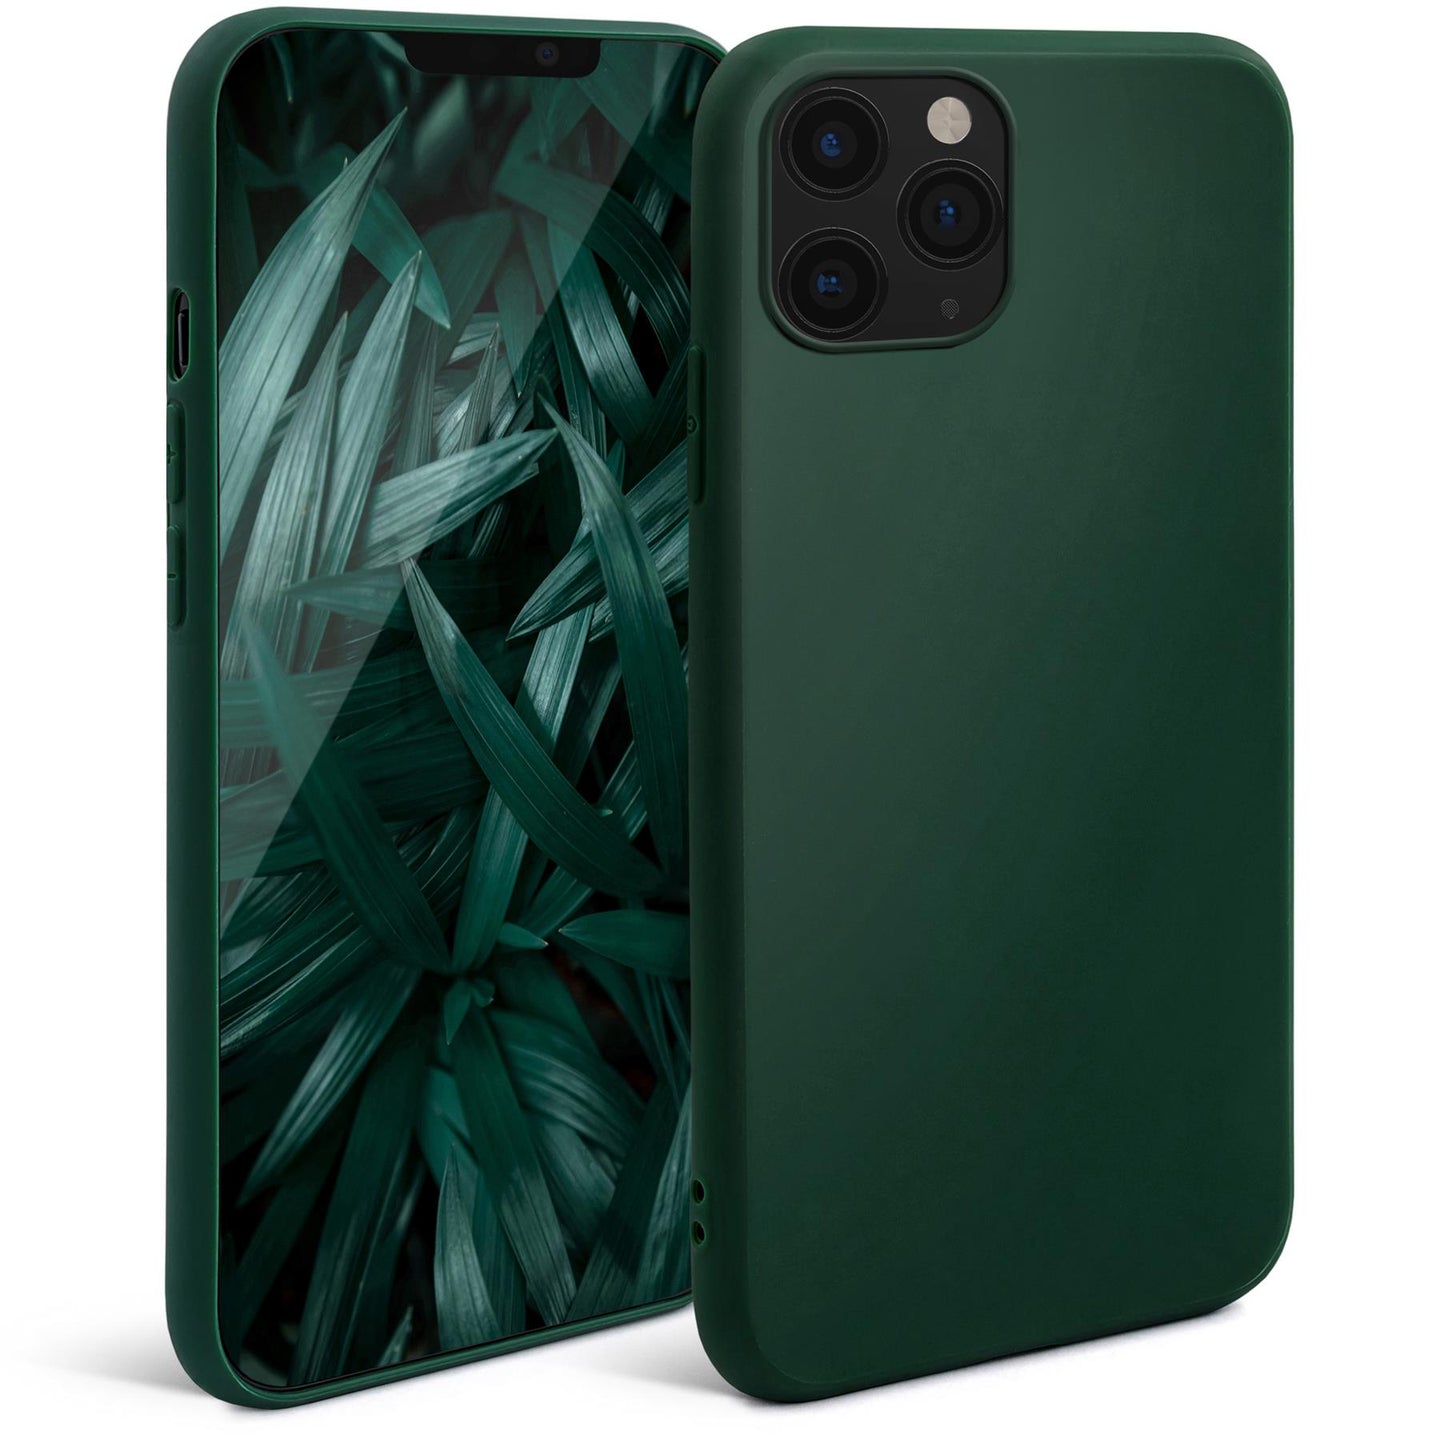 Moozy Minimalist Series Silicone Case for iPhone 11 Pro, Midnight Green - Matte Finish Slim Soft TPU Cover